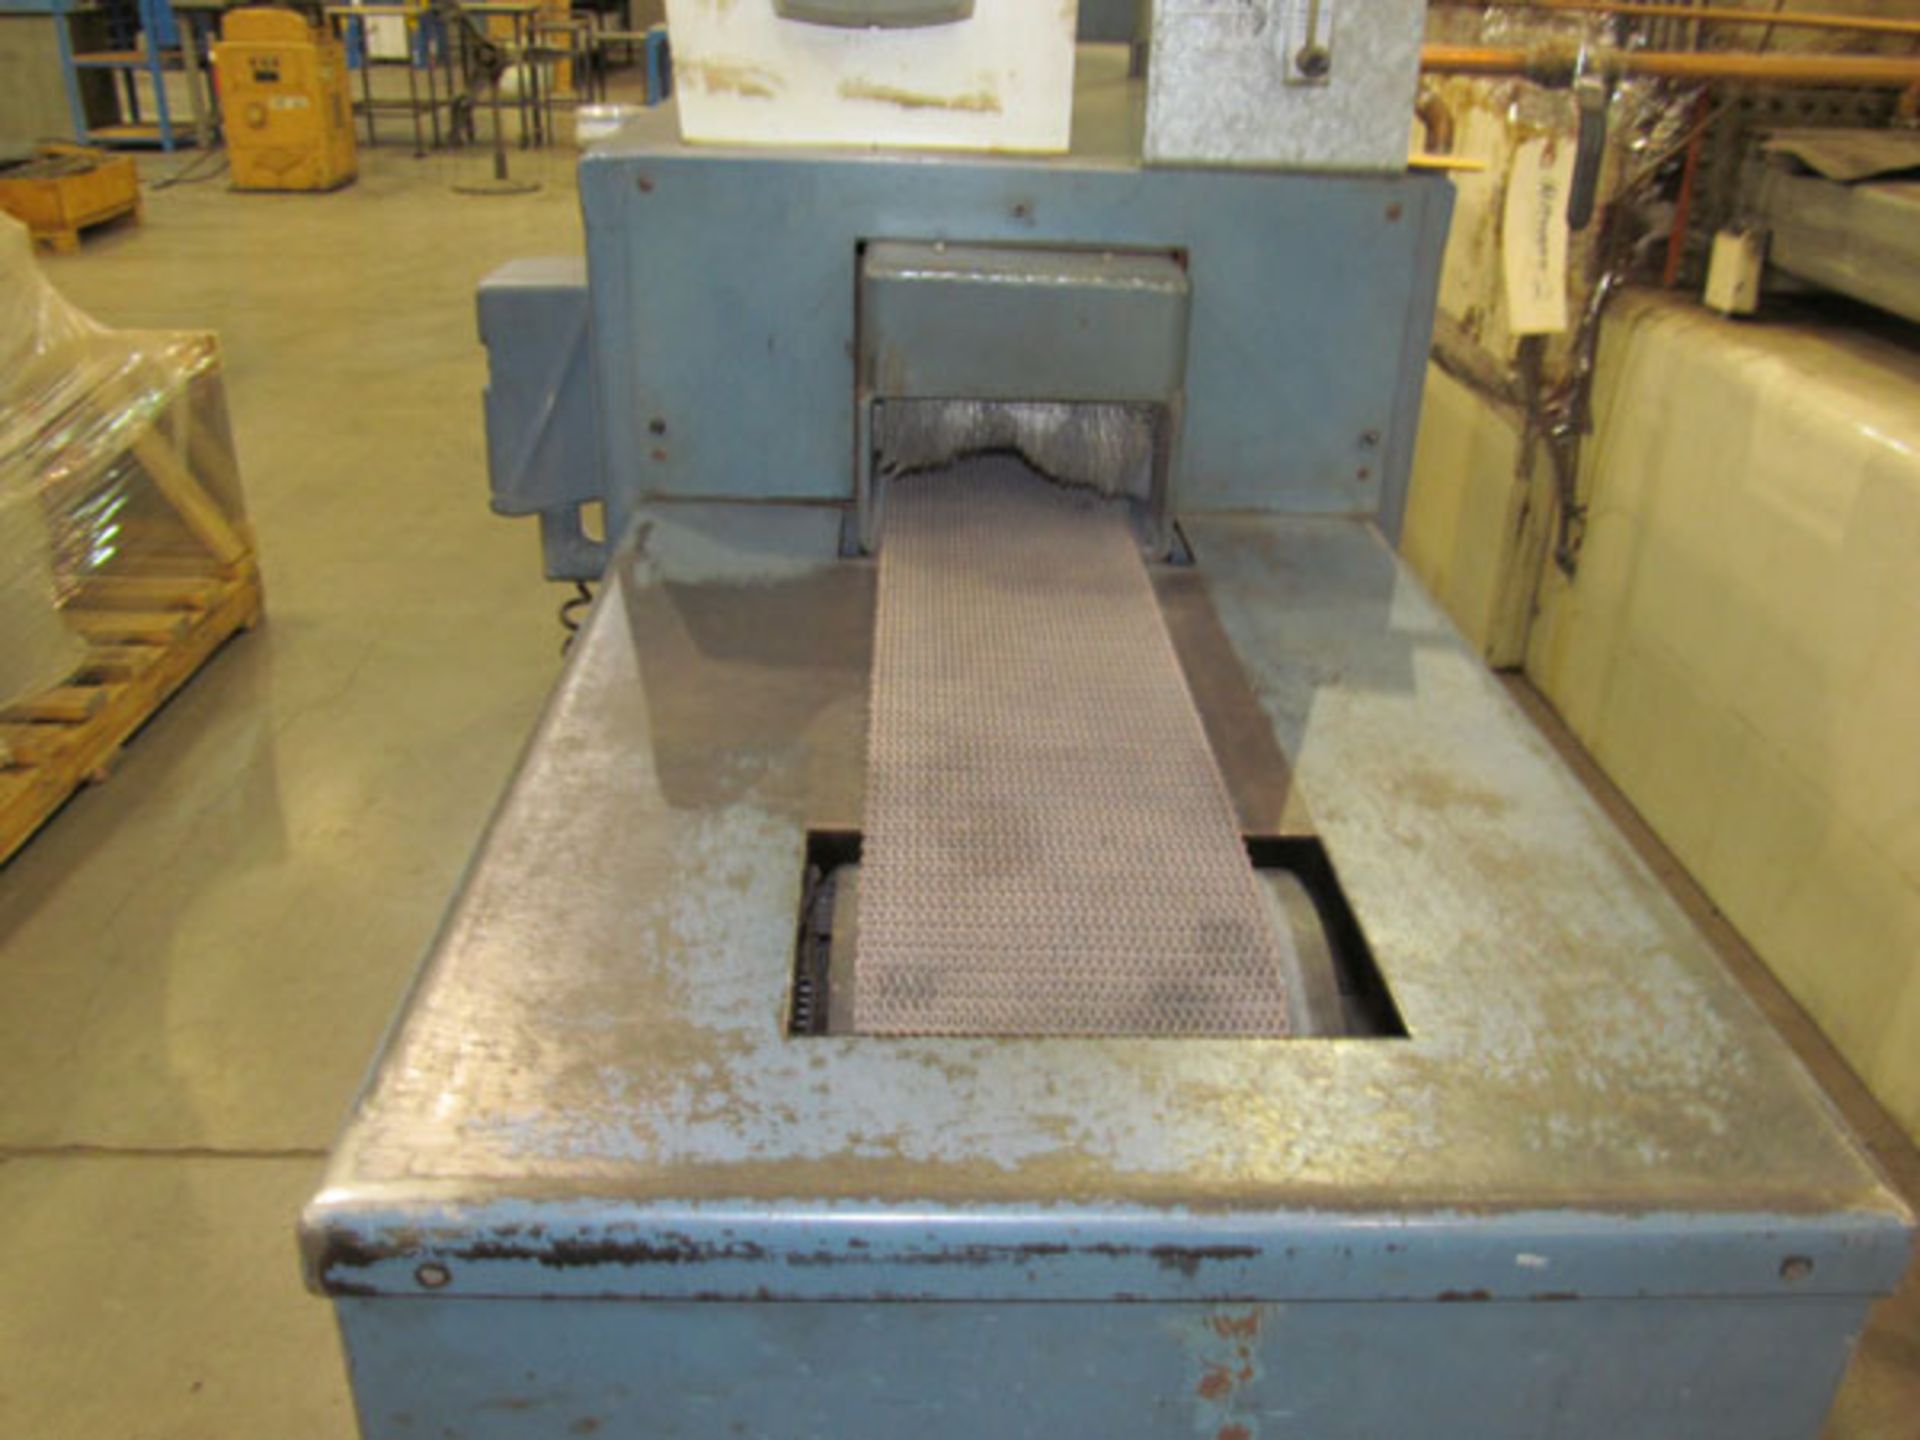 CI Hayes LAC Annealing Oven w/ Ammonia Dissociator Tunnel, s/n 1547, 6" x 168" Steel Mesh - Image 2 of 3